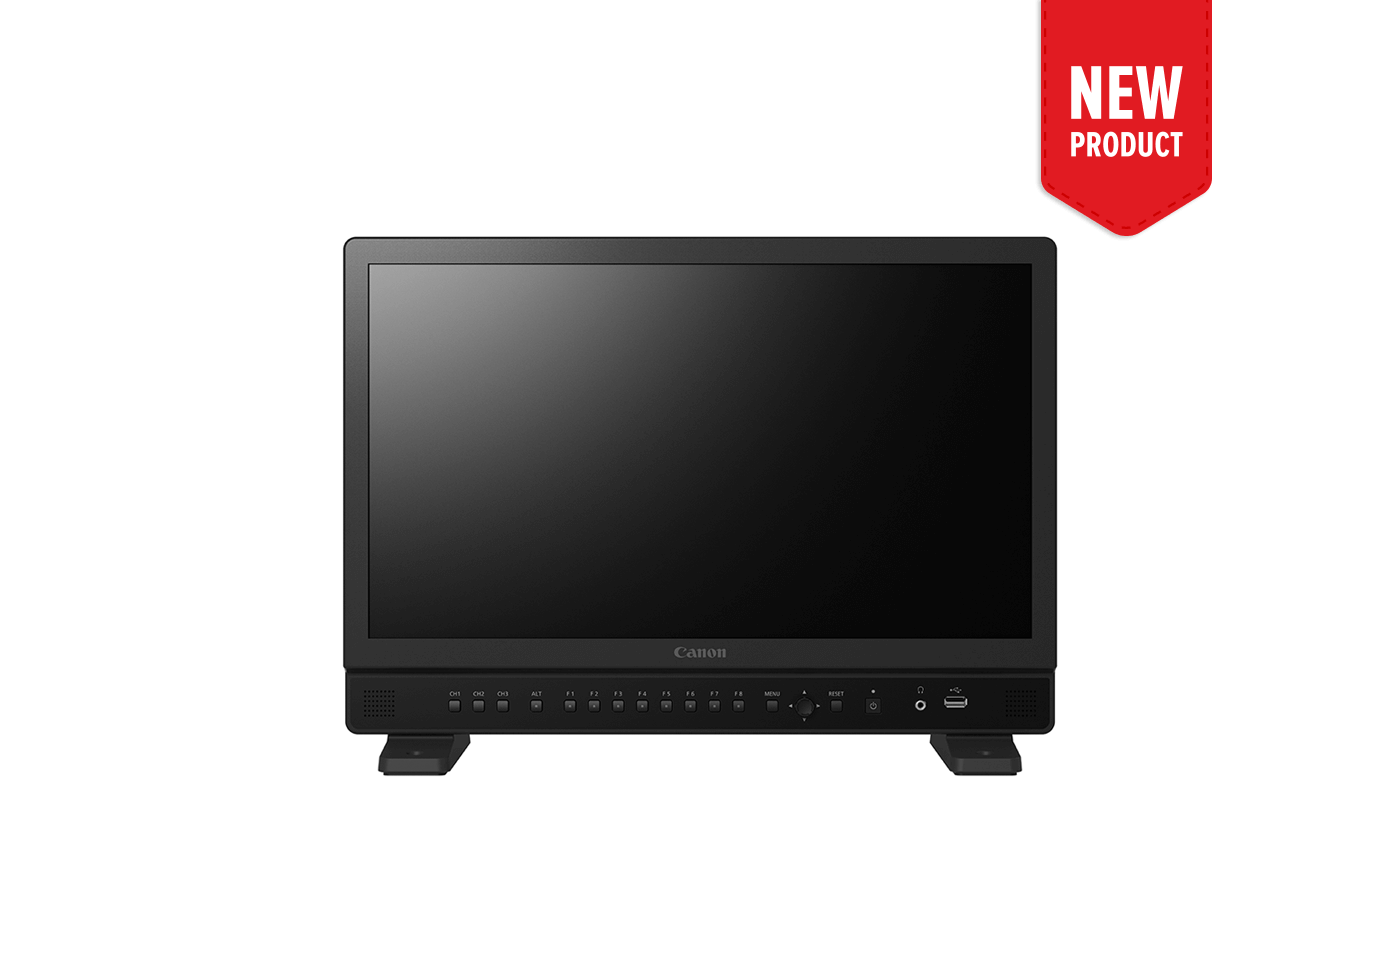 Product image of the new DP-V1830 4k display